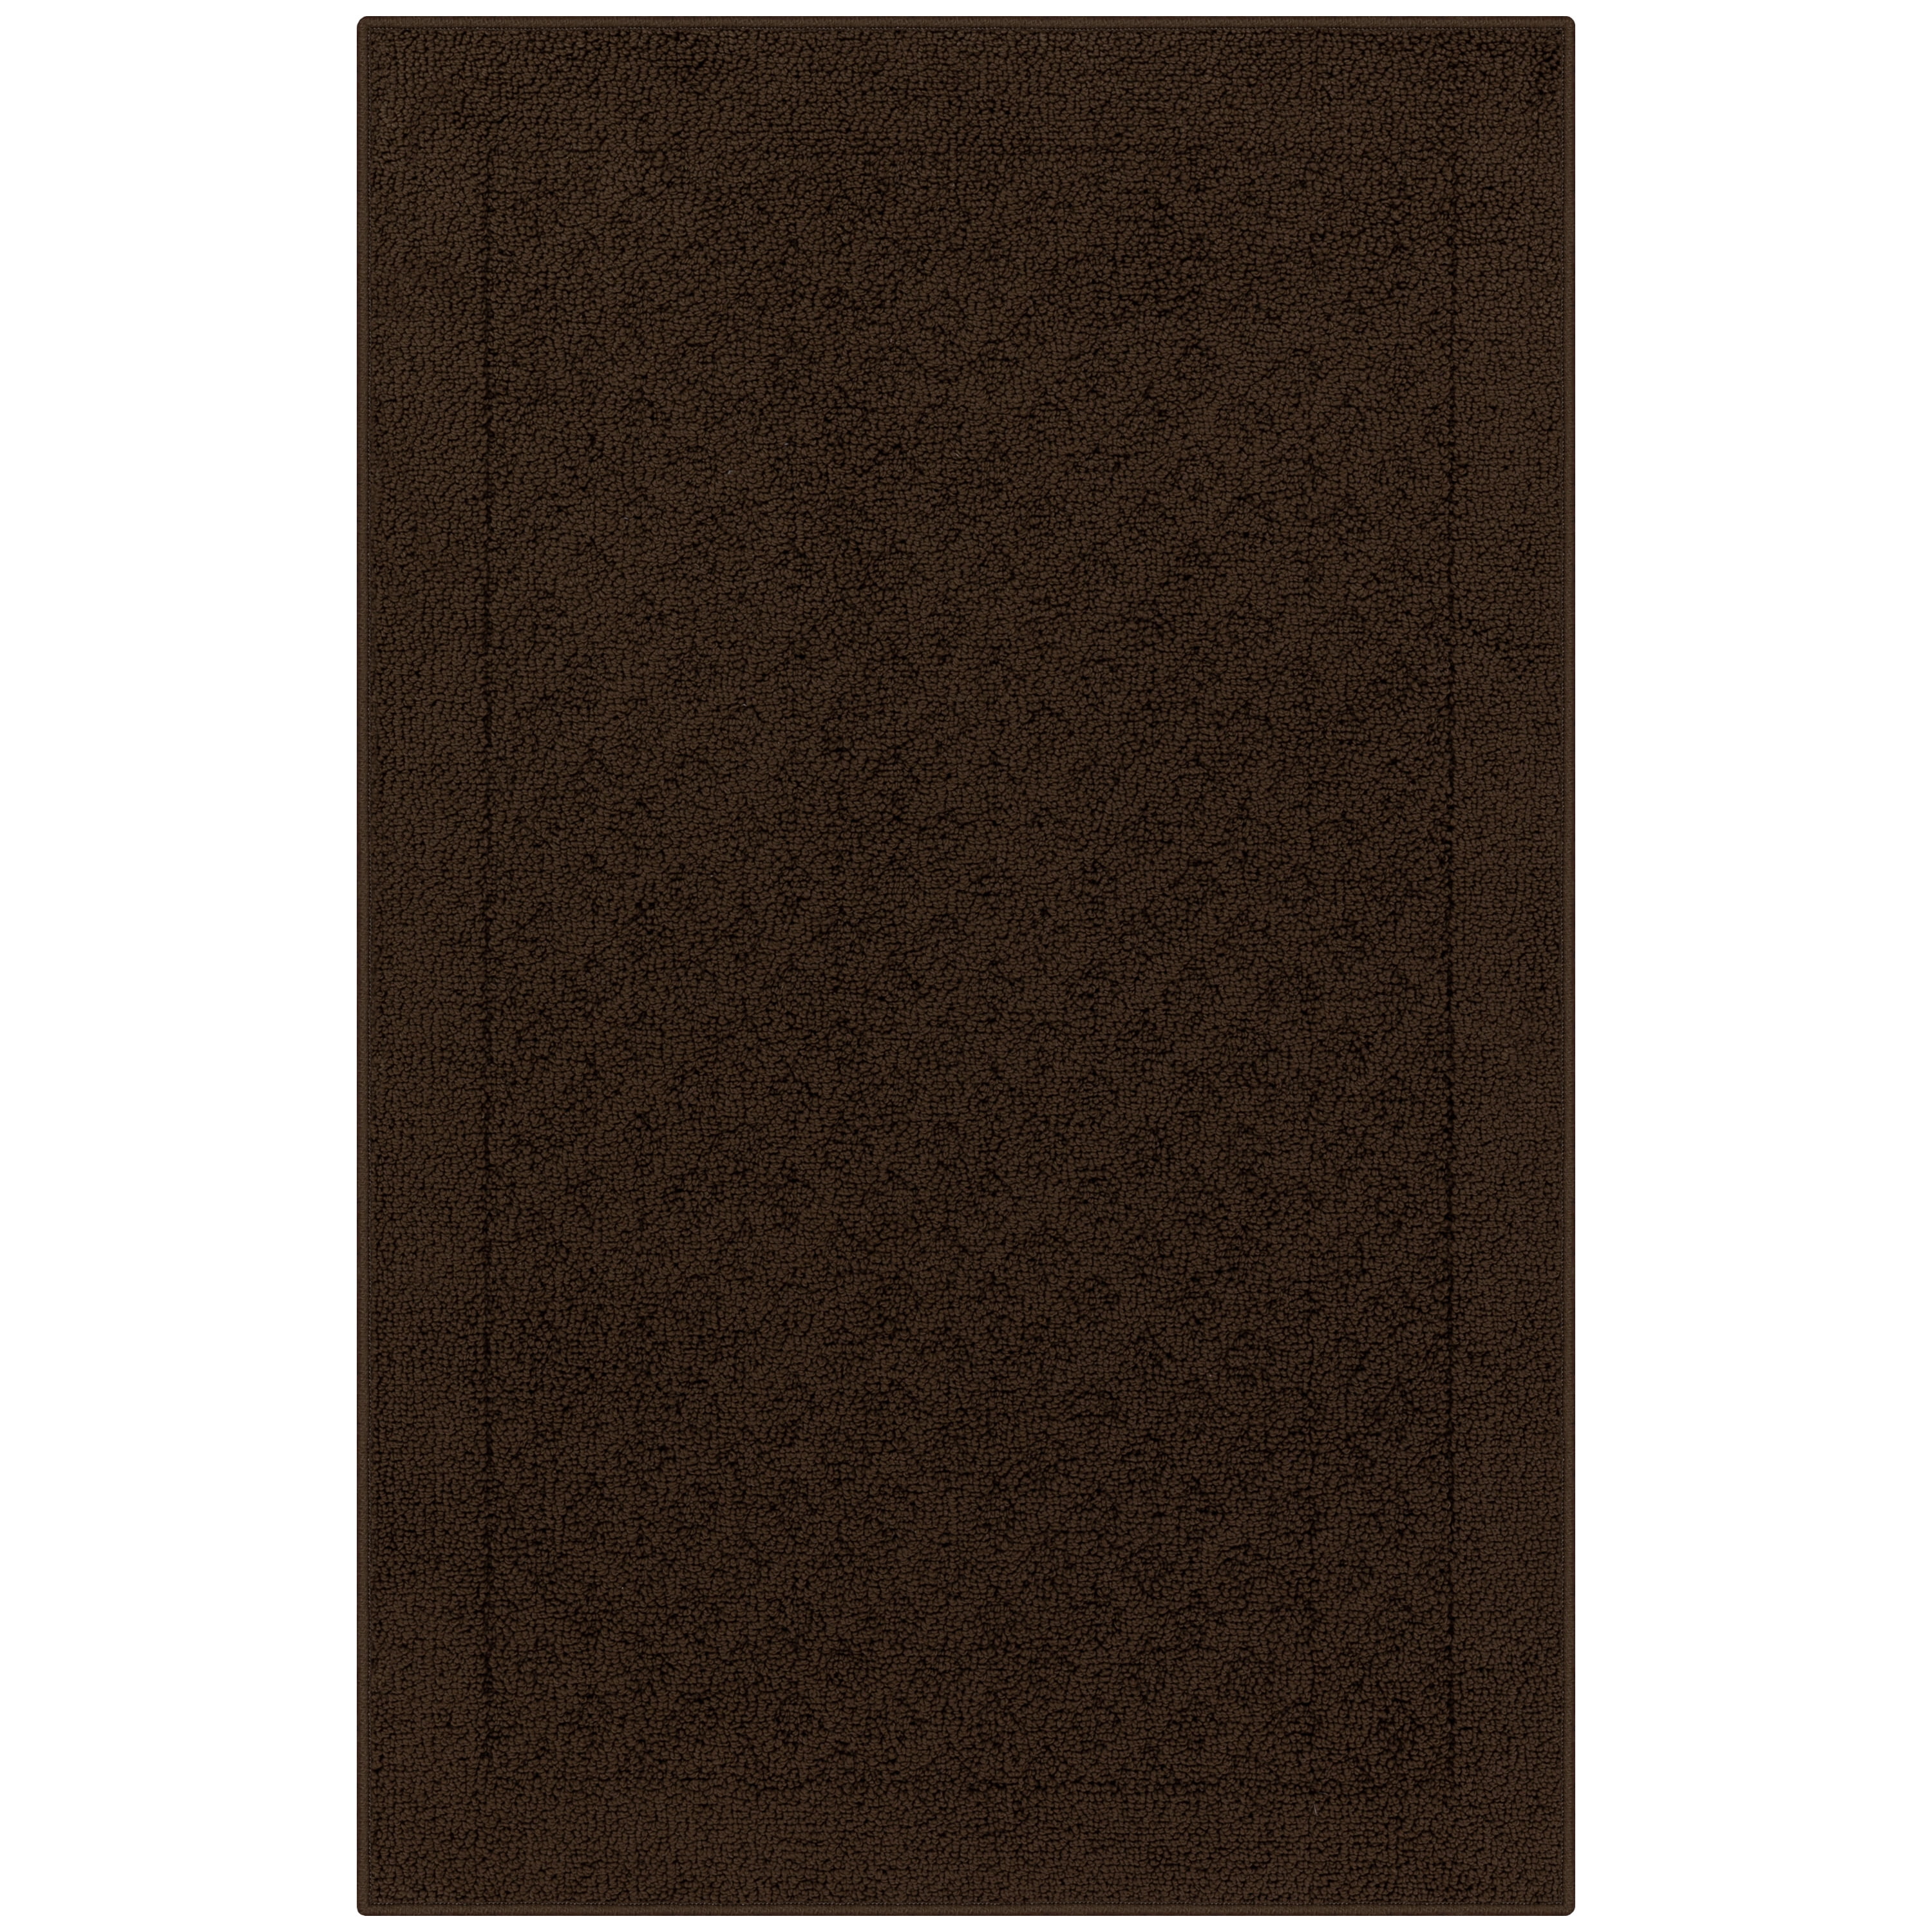 Mainstays Dylan Solid Diamond Traditional Brown Area Rug, 2'6"x3'10"